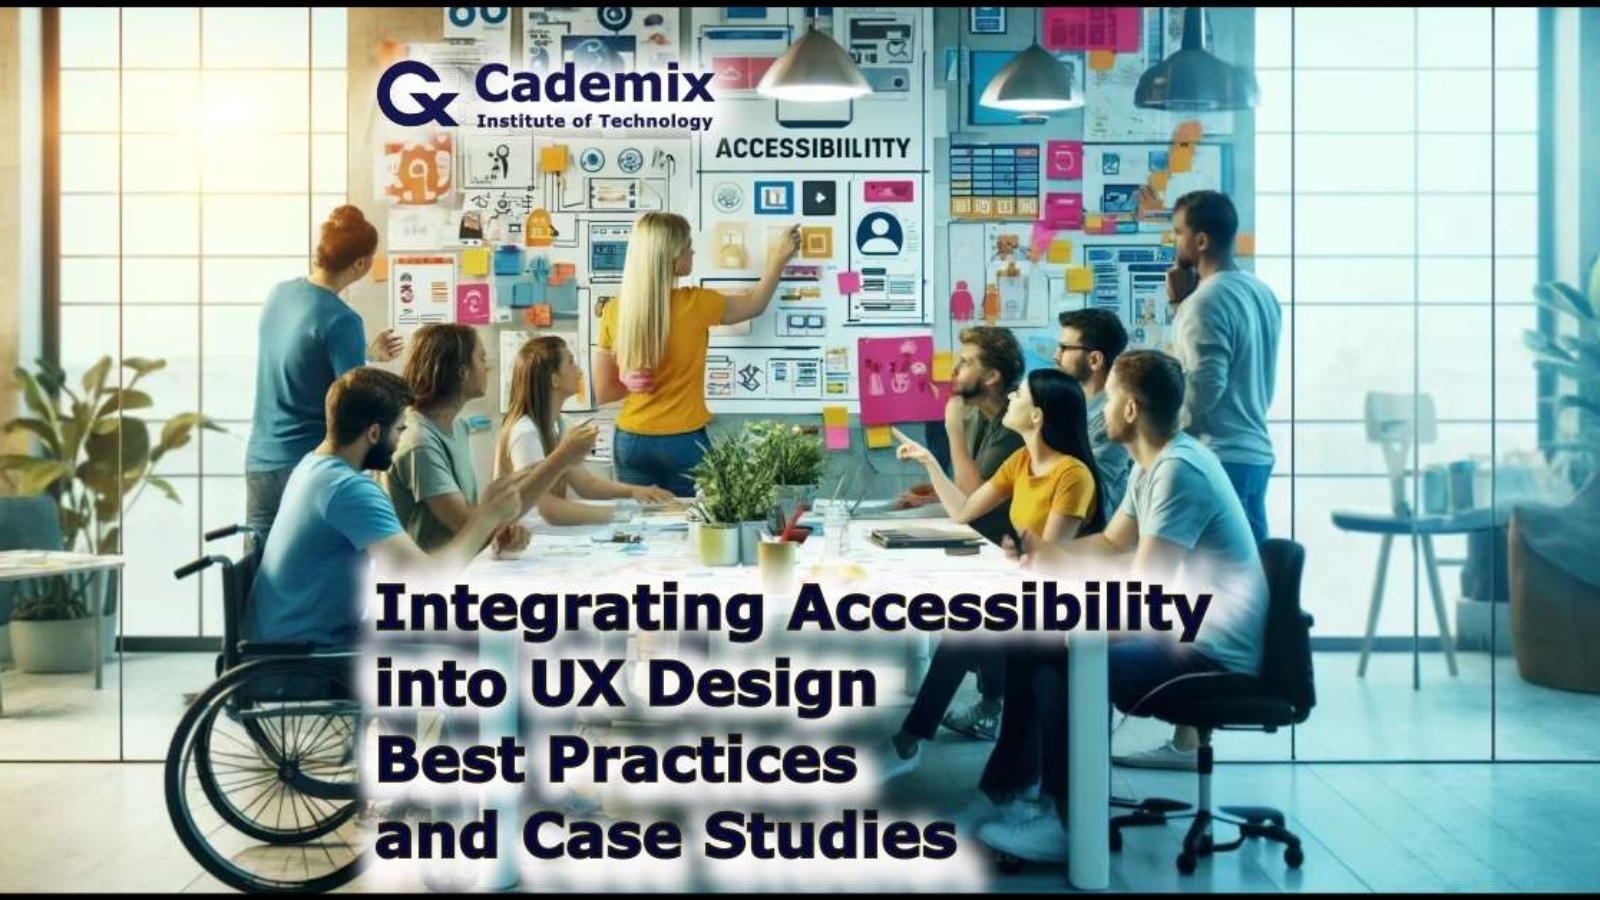 The scene shows them around a large table, surrounded by colorful sticky notes, sketches, and diagrams, in a vibrant and creative environment. By Samareh Ghaem Maghami, Cademix Magazine.